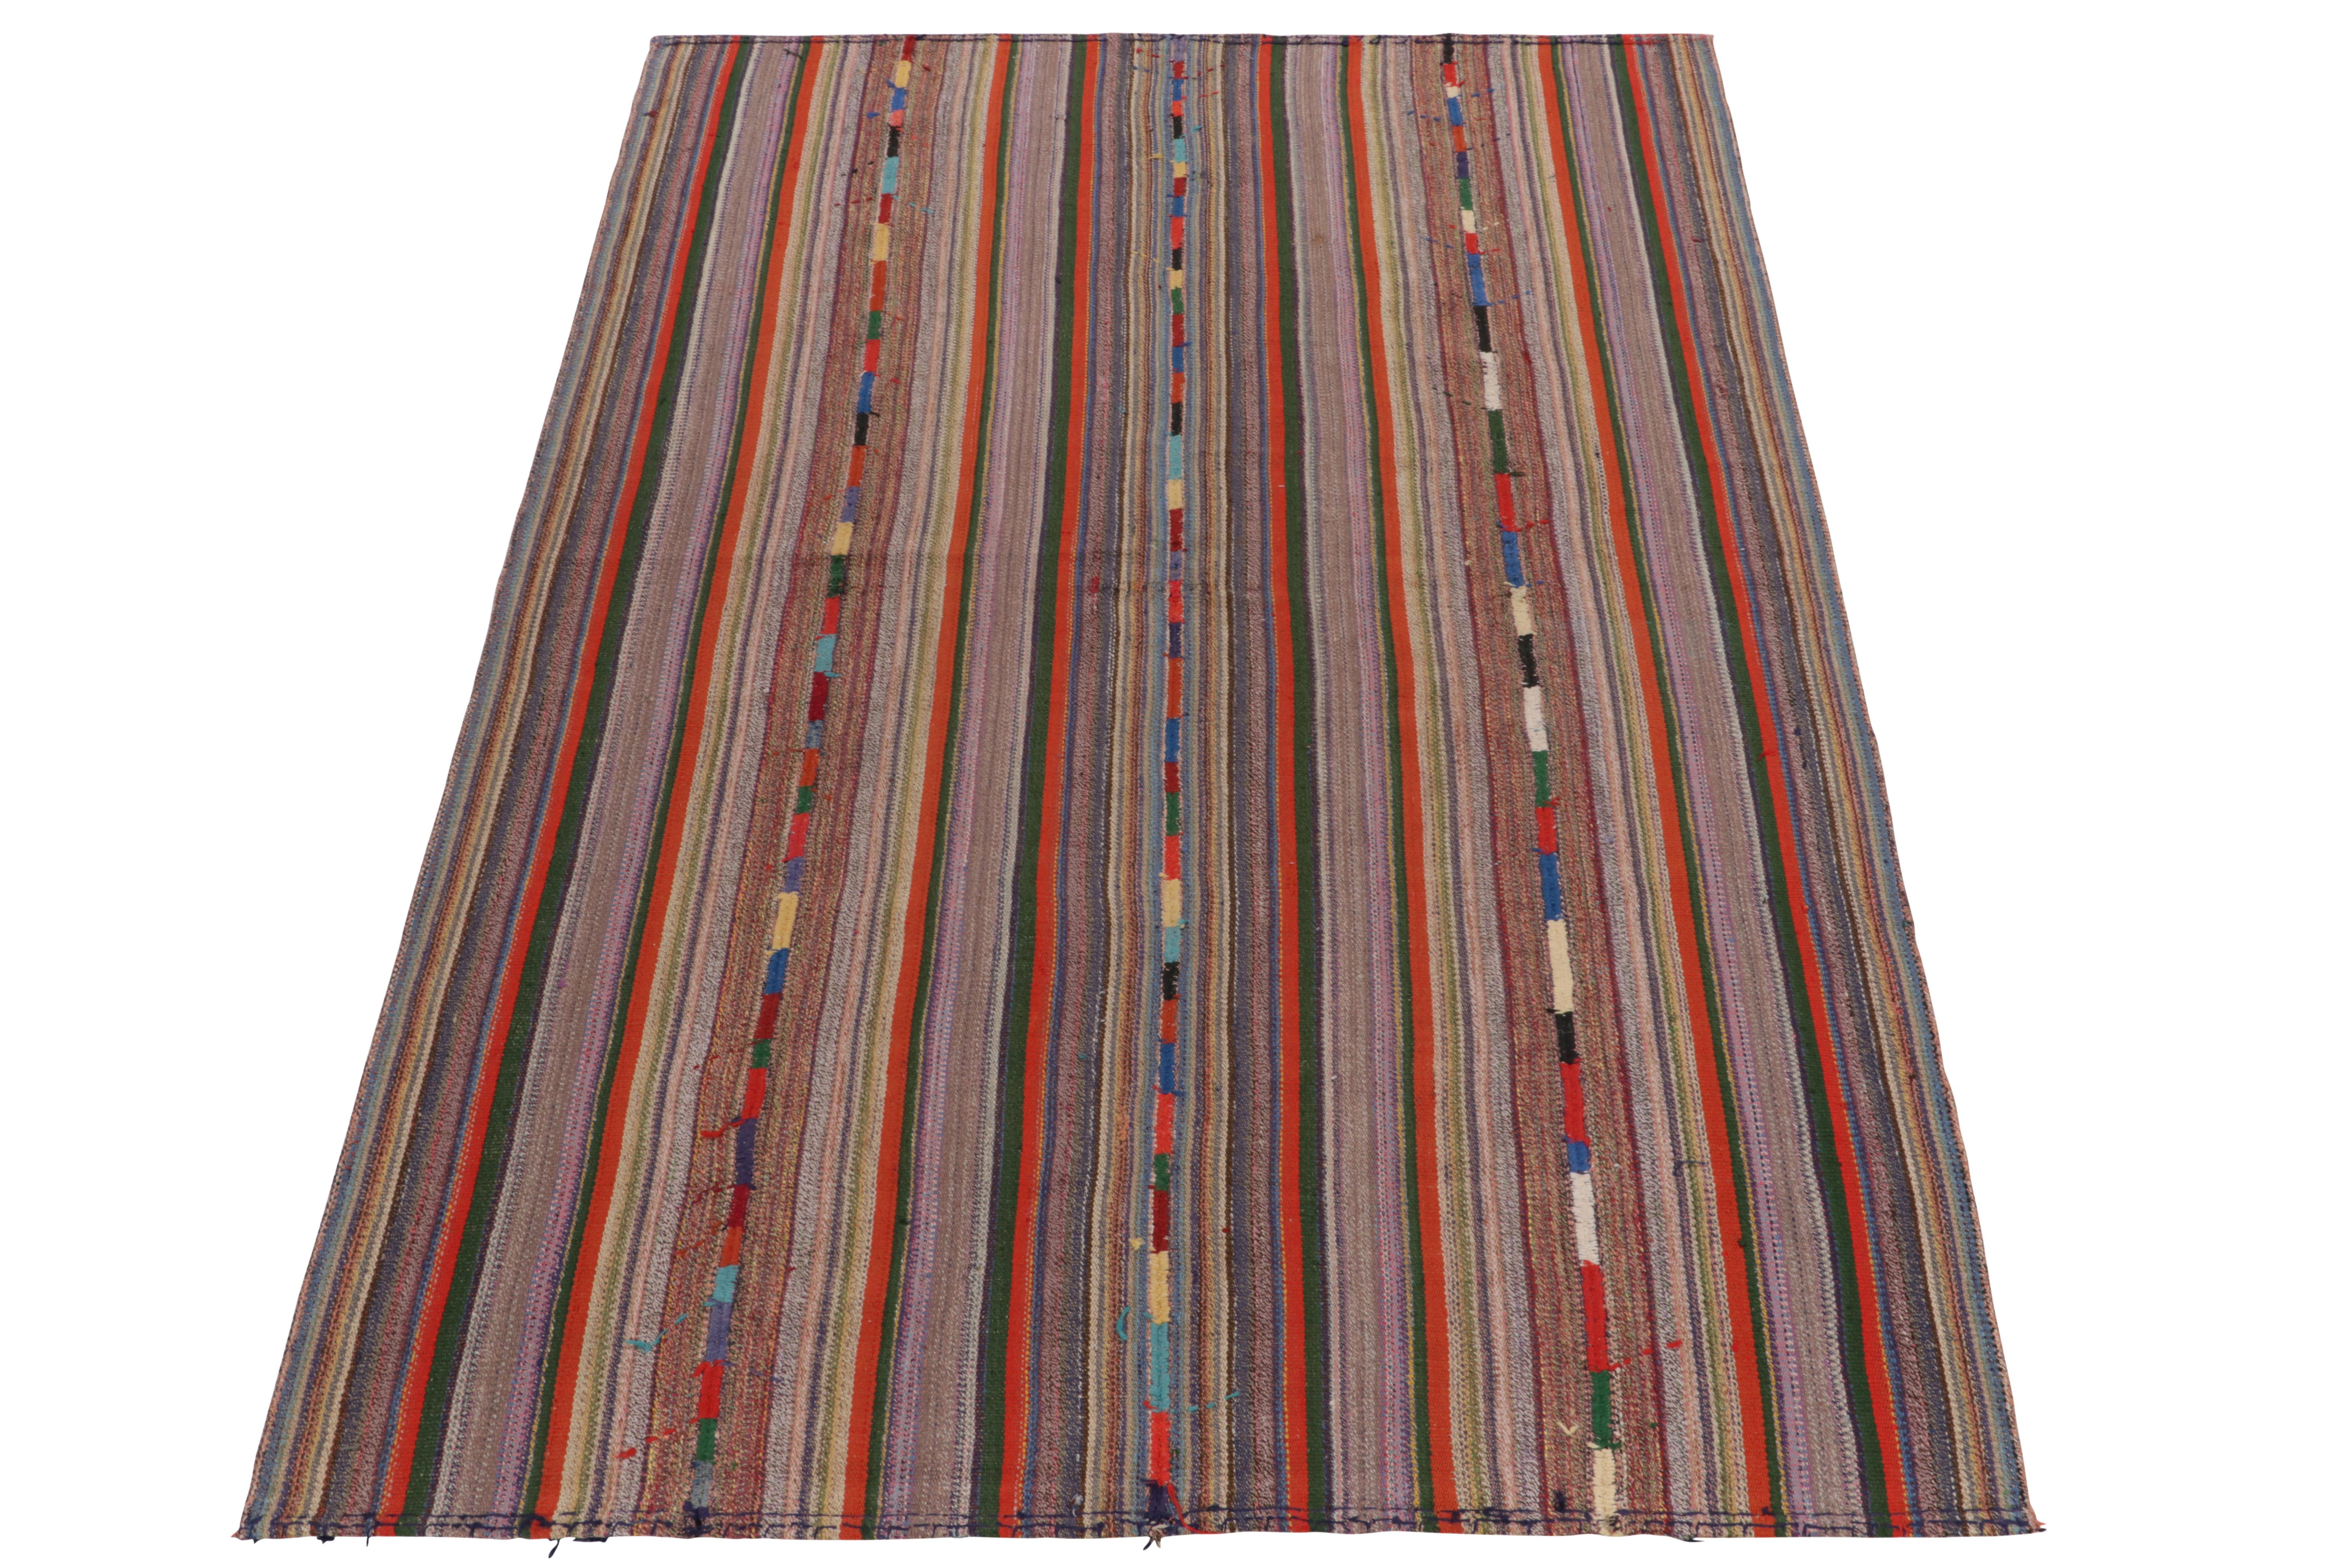 Originating from Turkey circa 1950-1960, a rare type of chaput kilim rug style now entering our Antique & Vintage selections. Characterized by fine detailing with the colors within the polychromatic stripes, the light & refreshing piece welcomes a